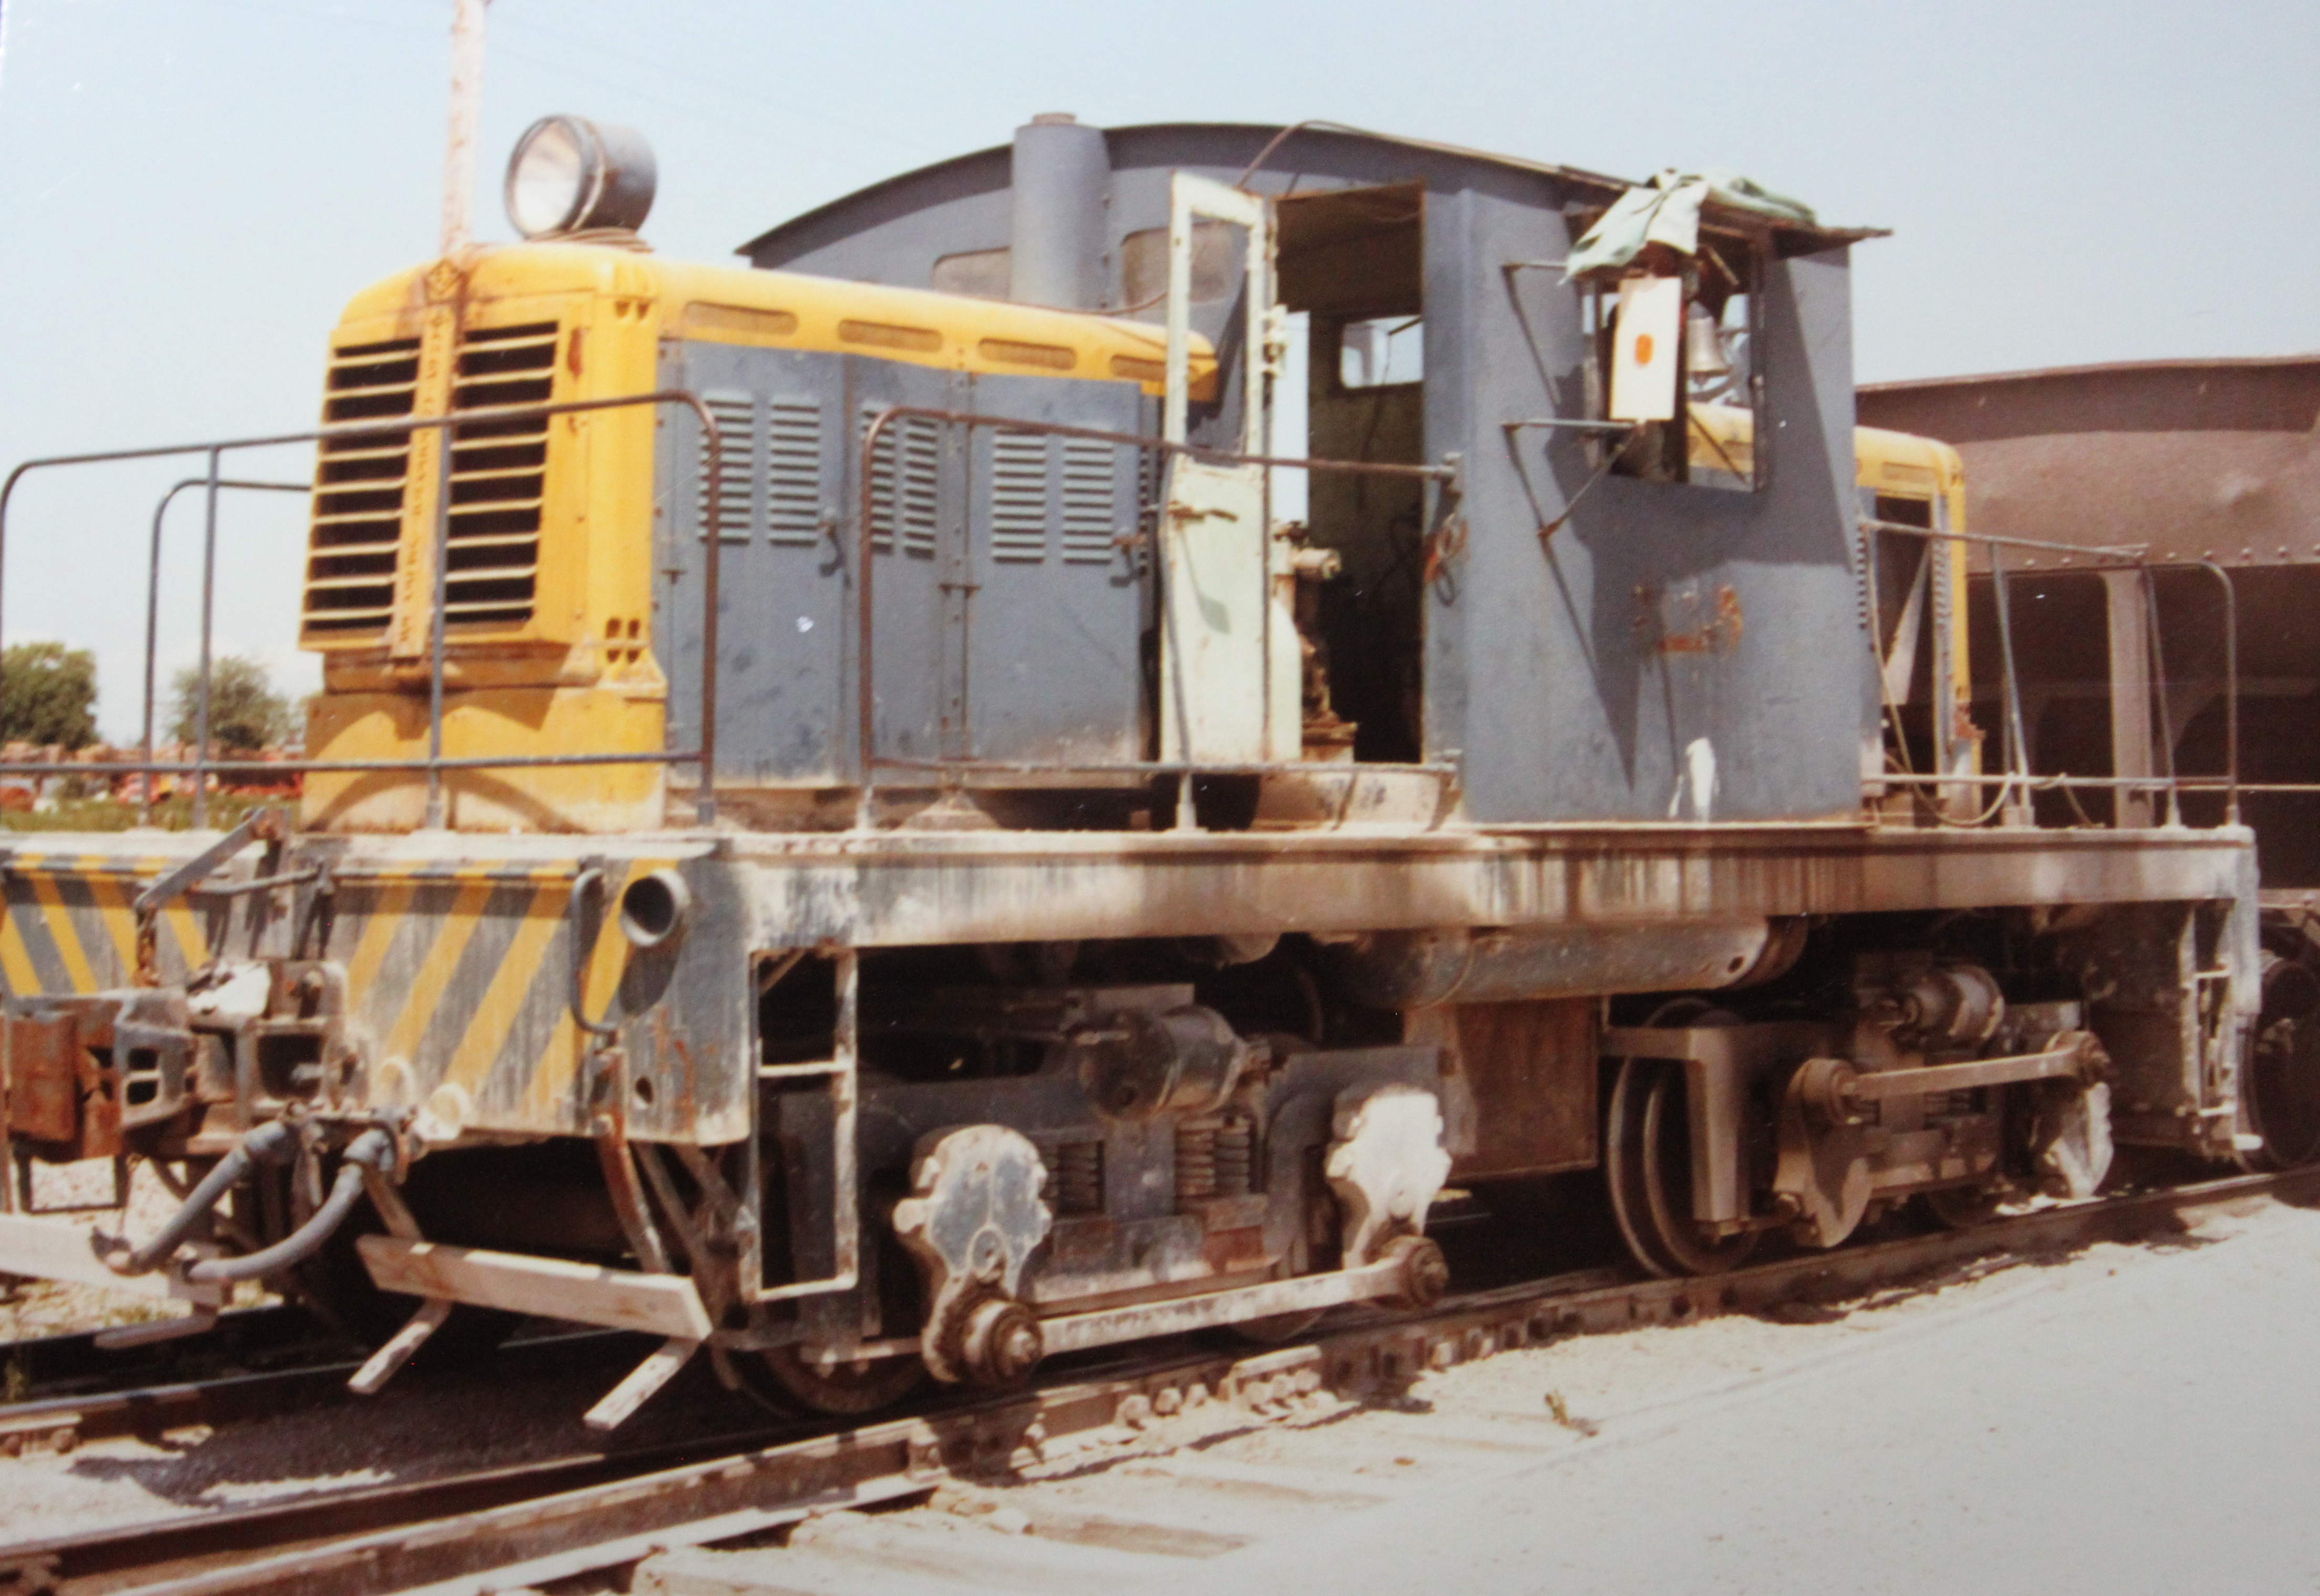 No. 1 is connected to a brown hopper car in an industrial environment. The door to the locomotive cab is ajar.